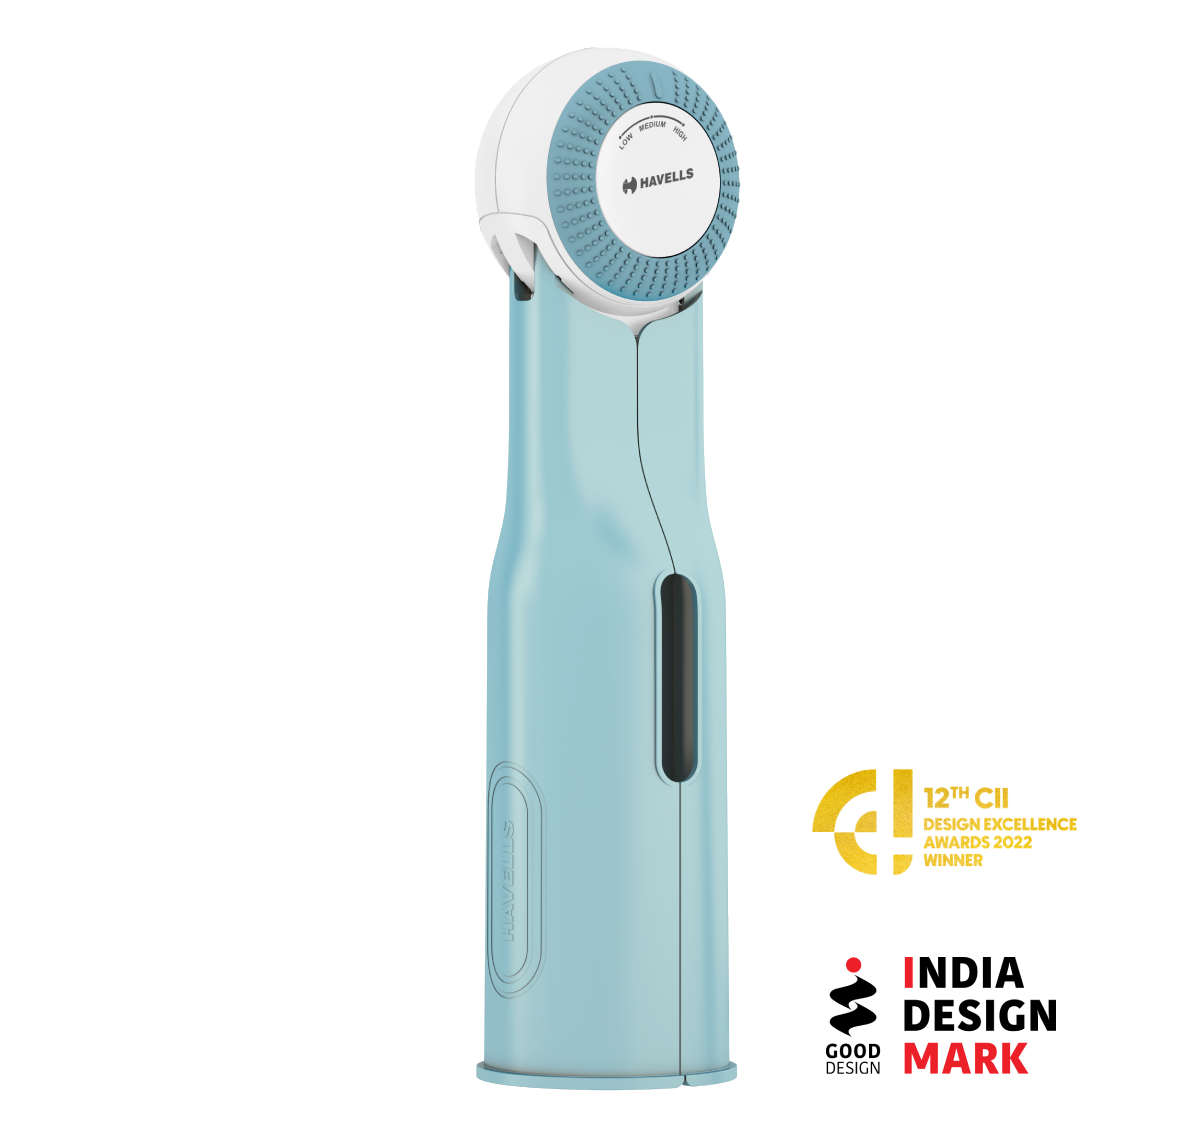 IMMERSION WATER HEATER